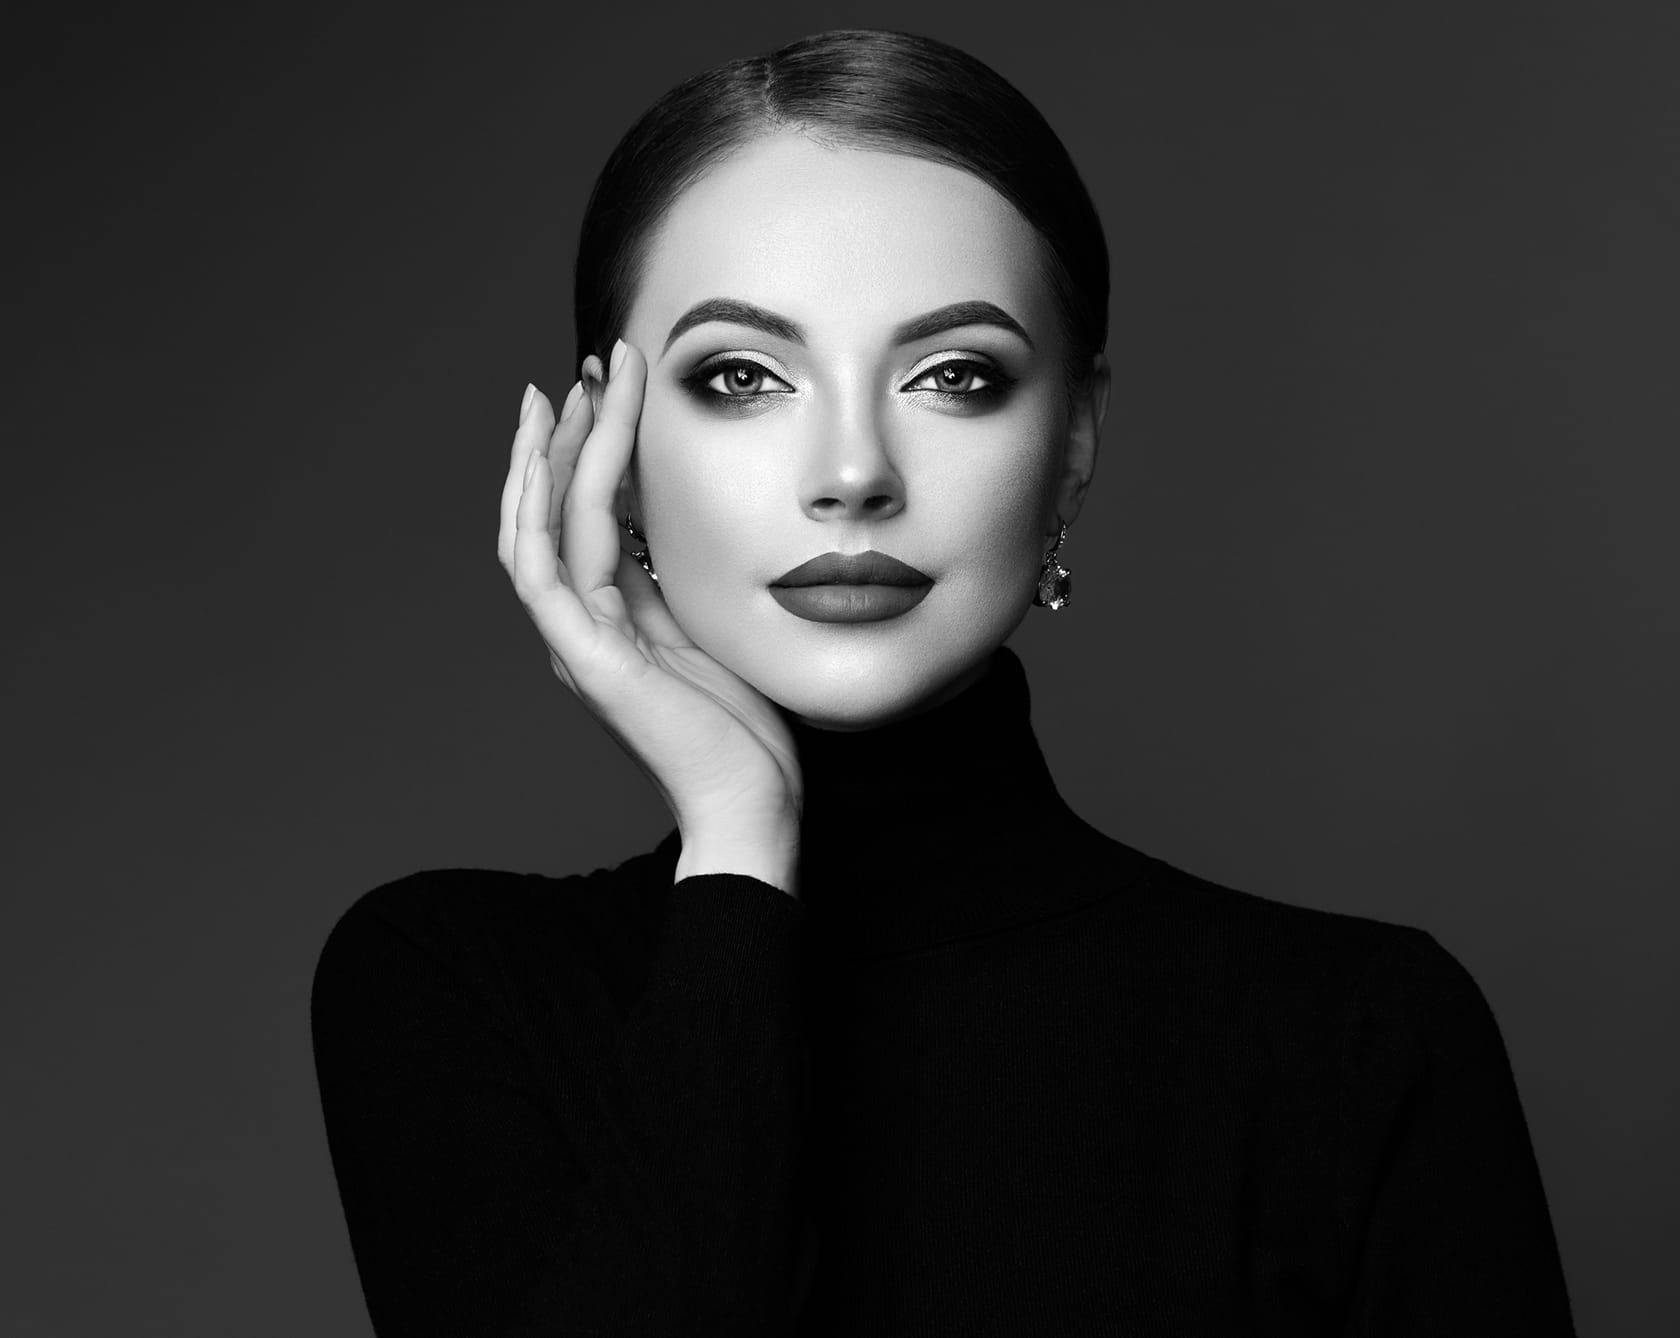 a black and white image of a woman in a black turtleneck